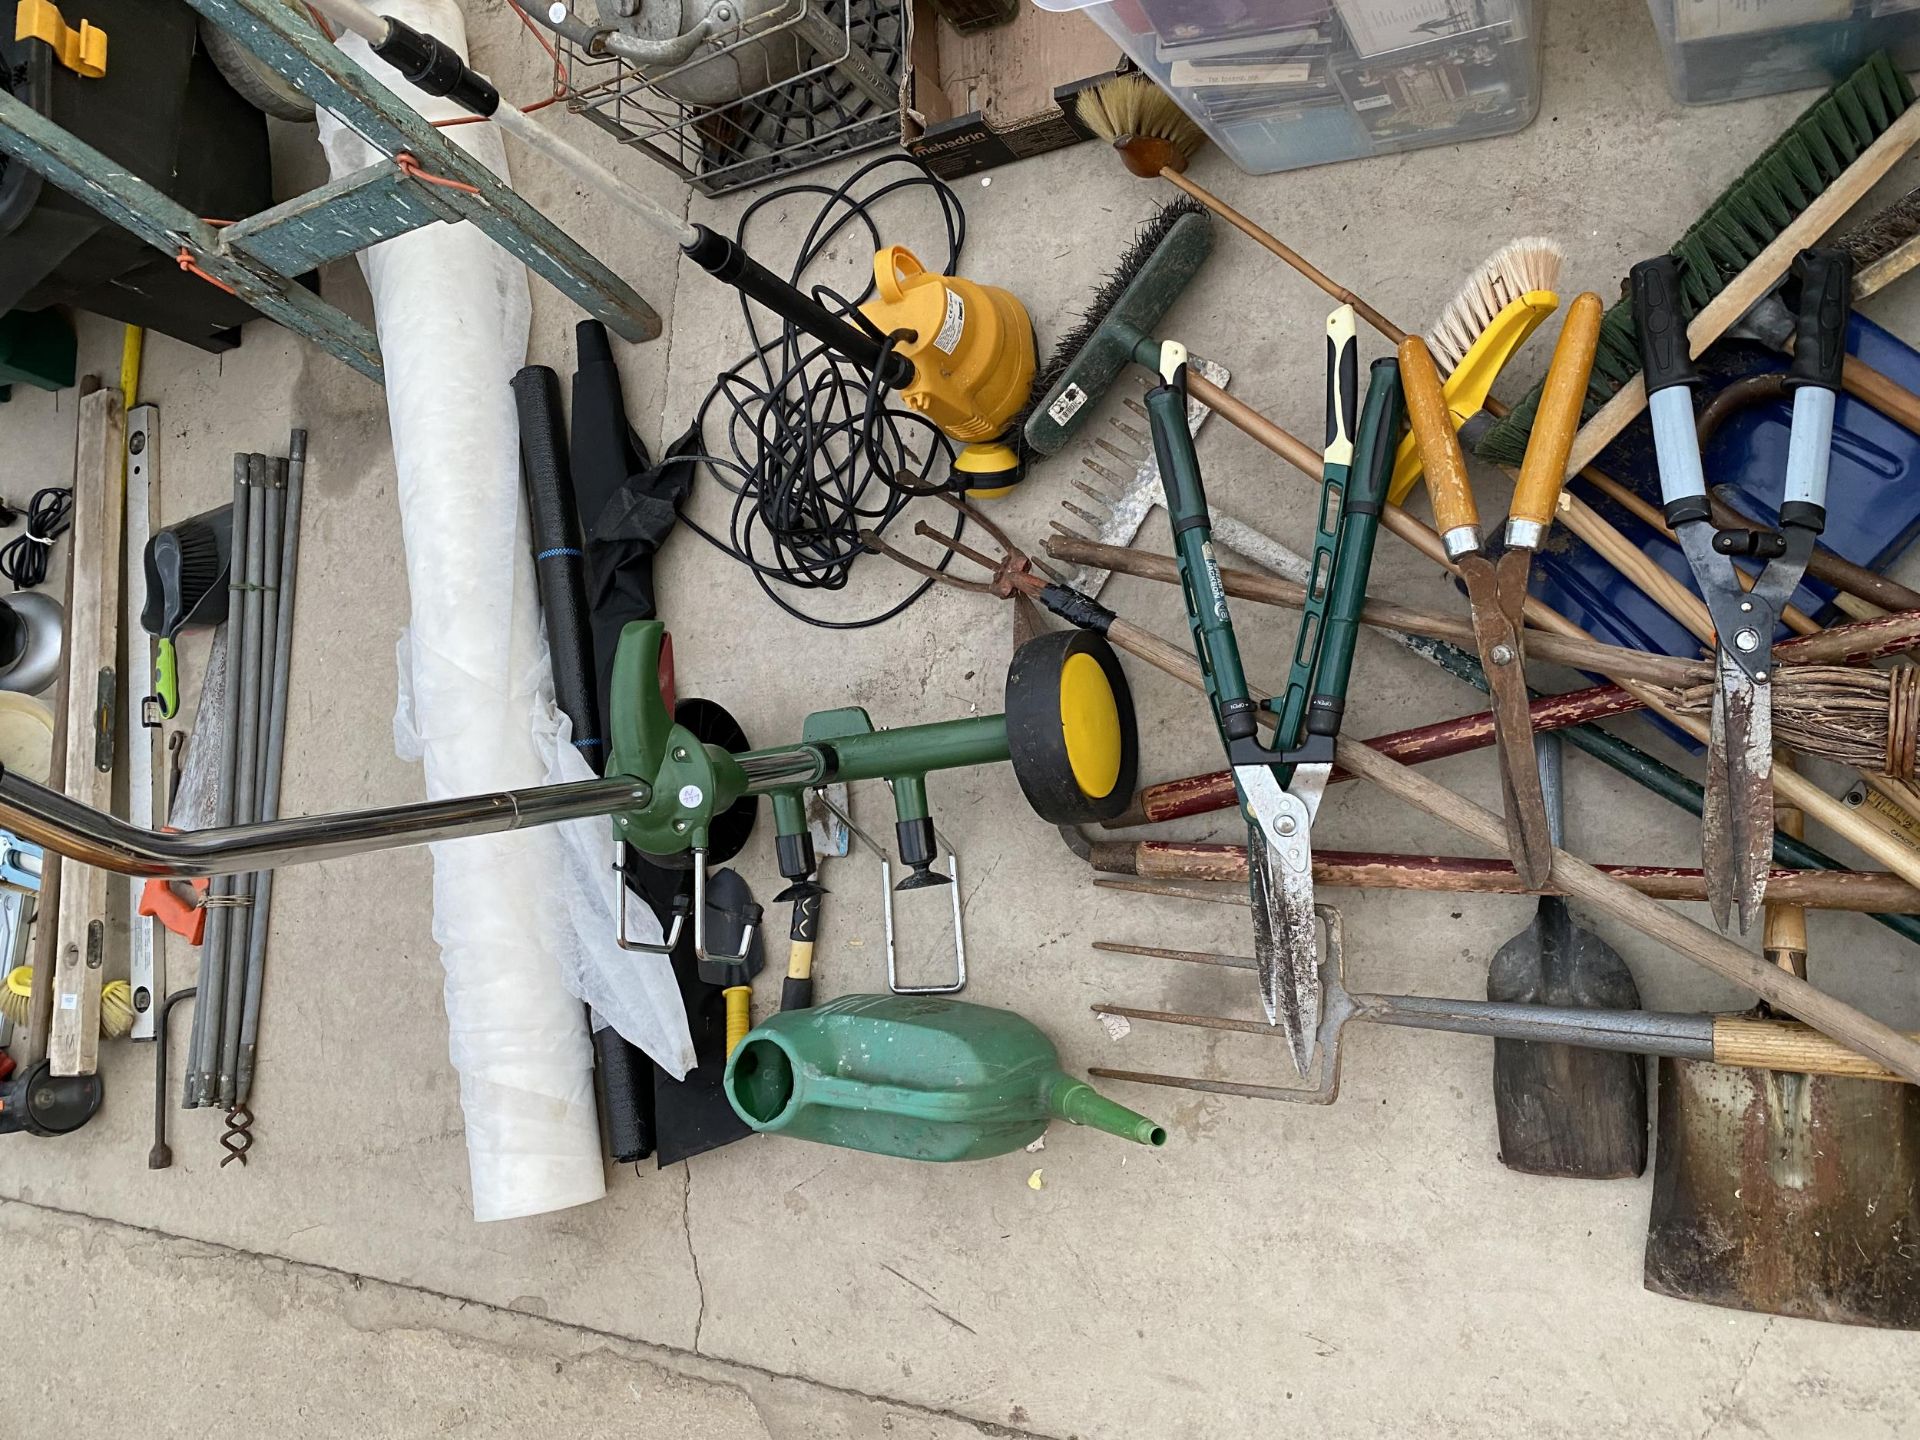 A LARGE ASSORTMENT OF GARDEN TOOLS TO INCLUDE A PICK AXE, FORKS AND RAKES TO ALSO INCLUDE A PLANT - Image 4 of 5